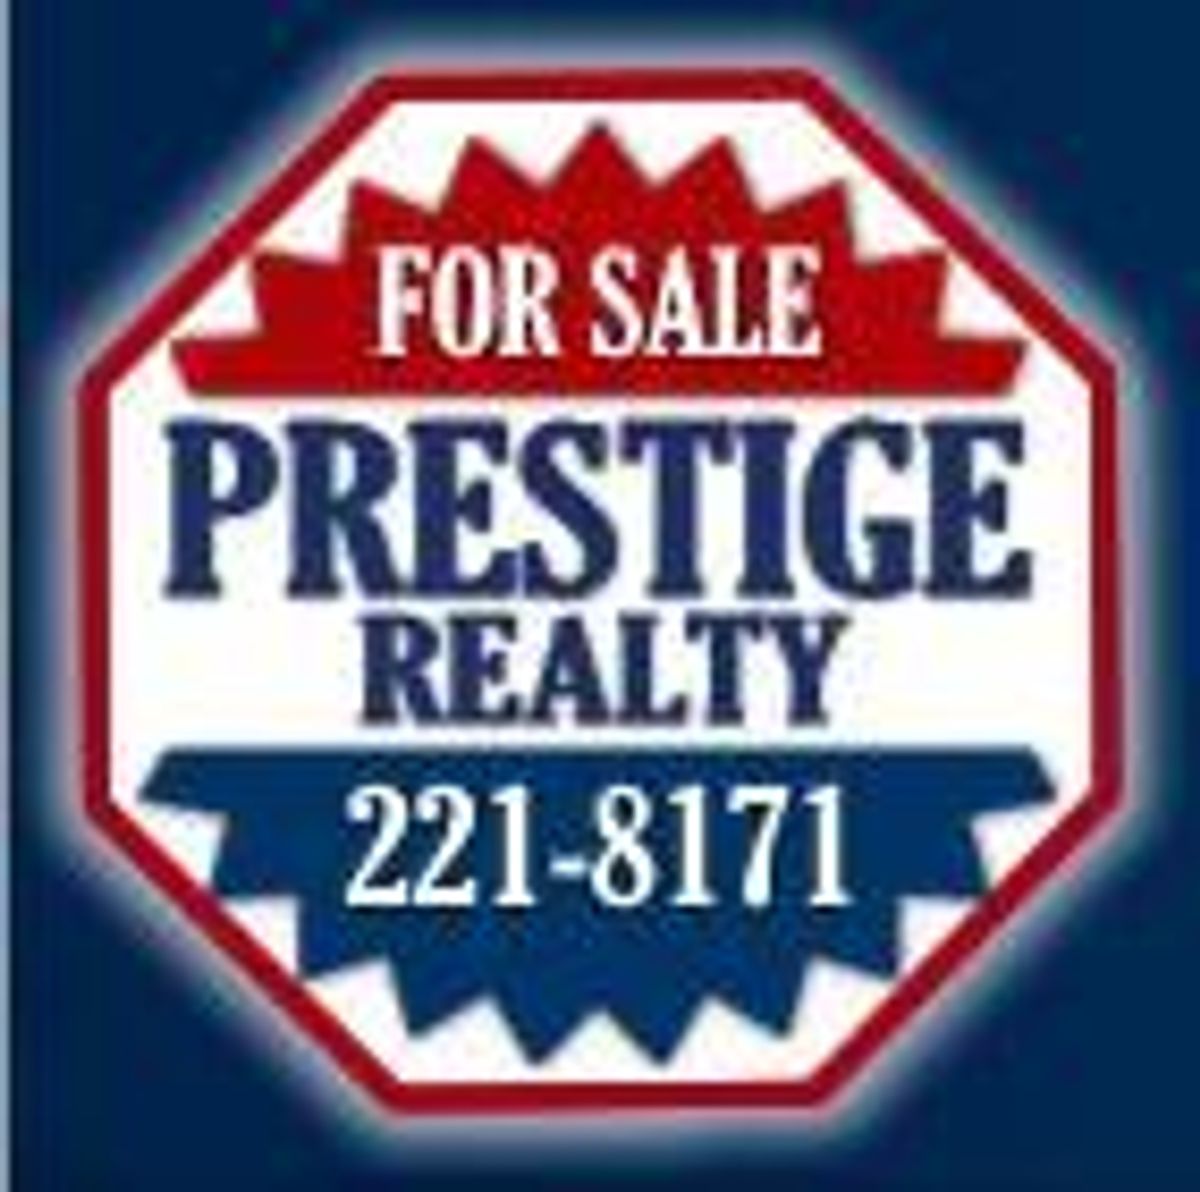 Photo for Sue-ann Westhoff, Listing Agent at Prestige Realty, Inc